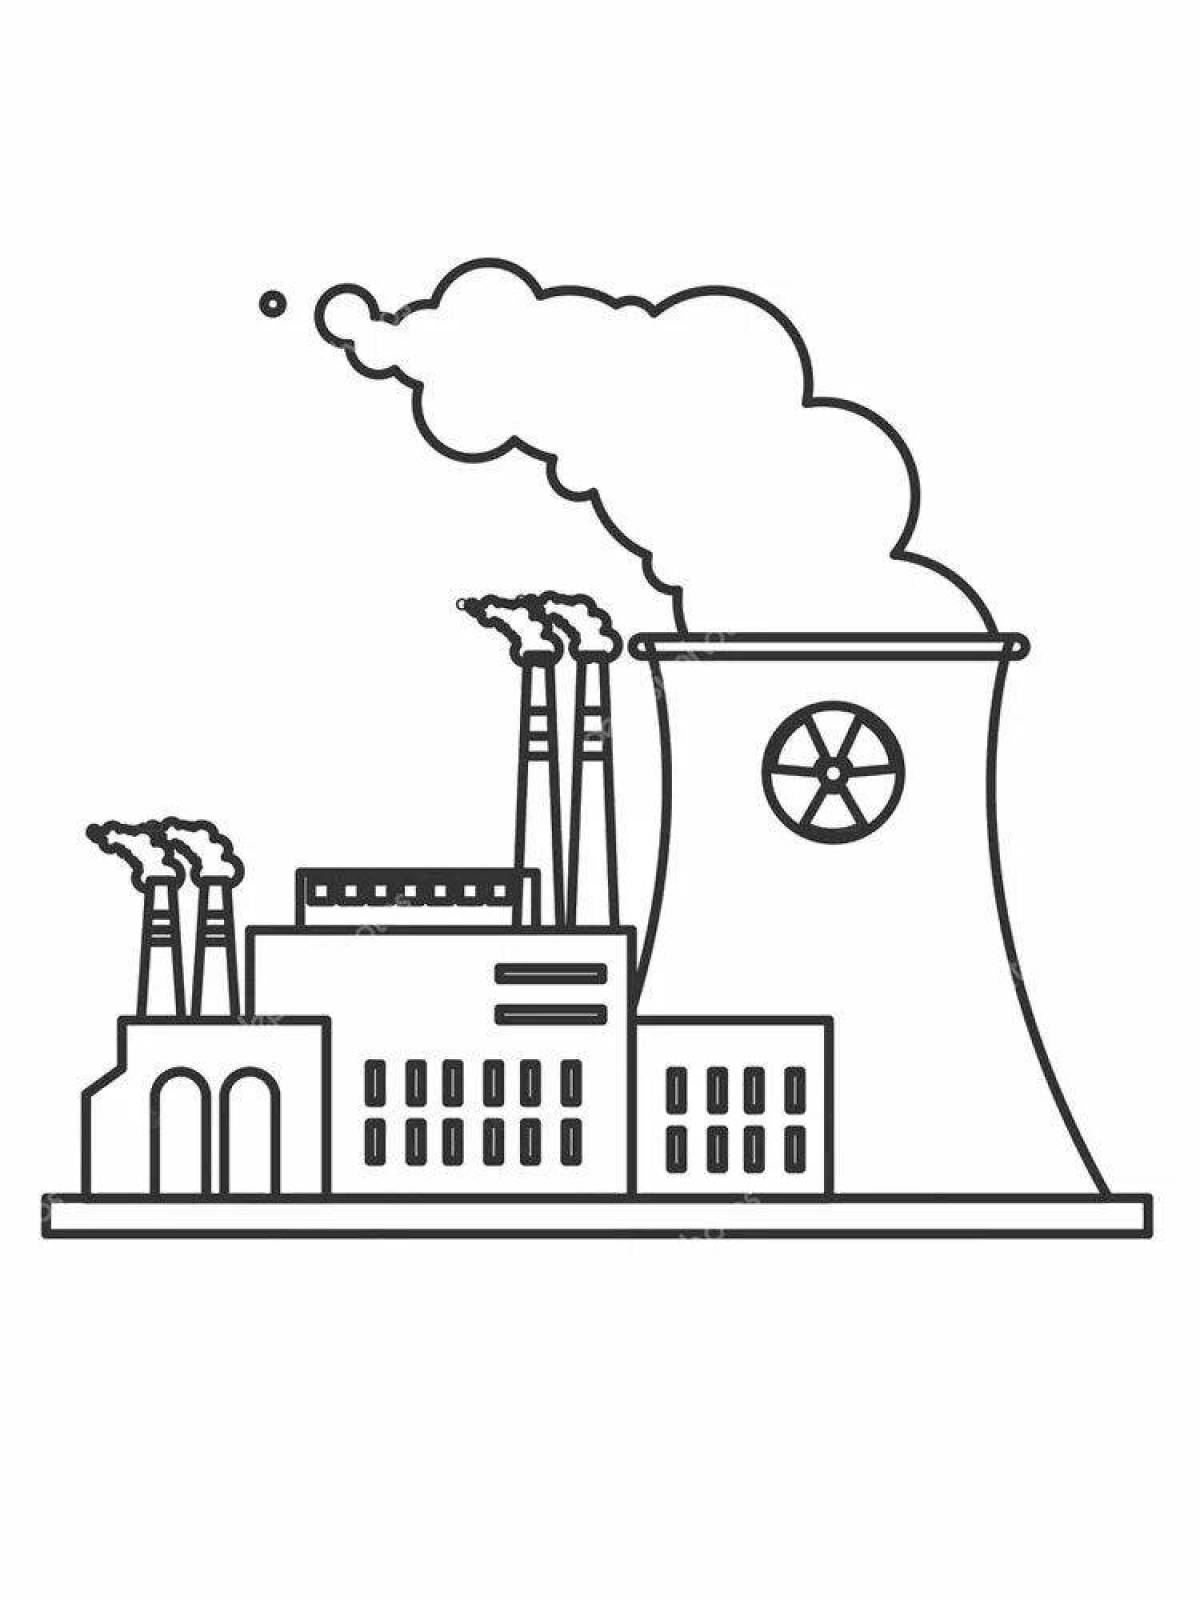 Improved power plant coloring page